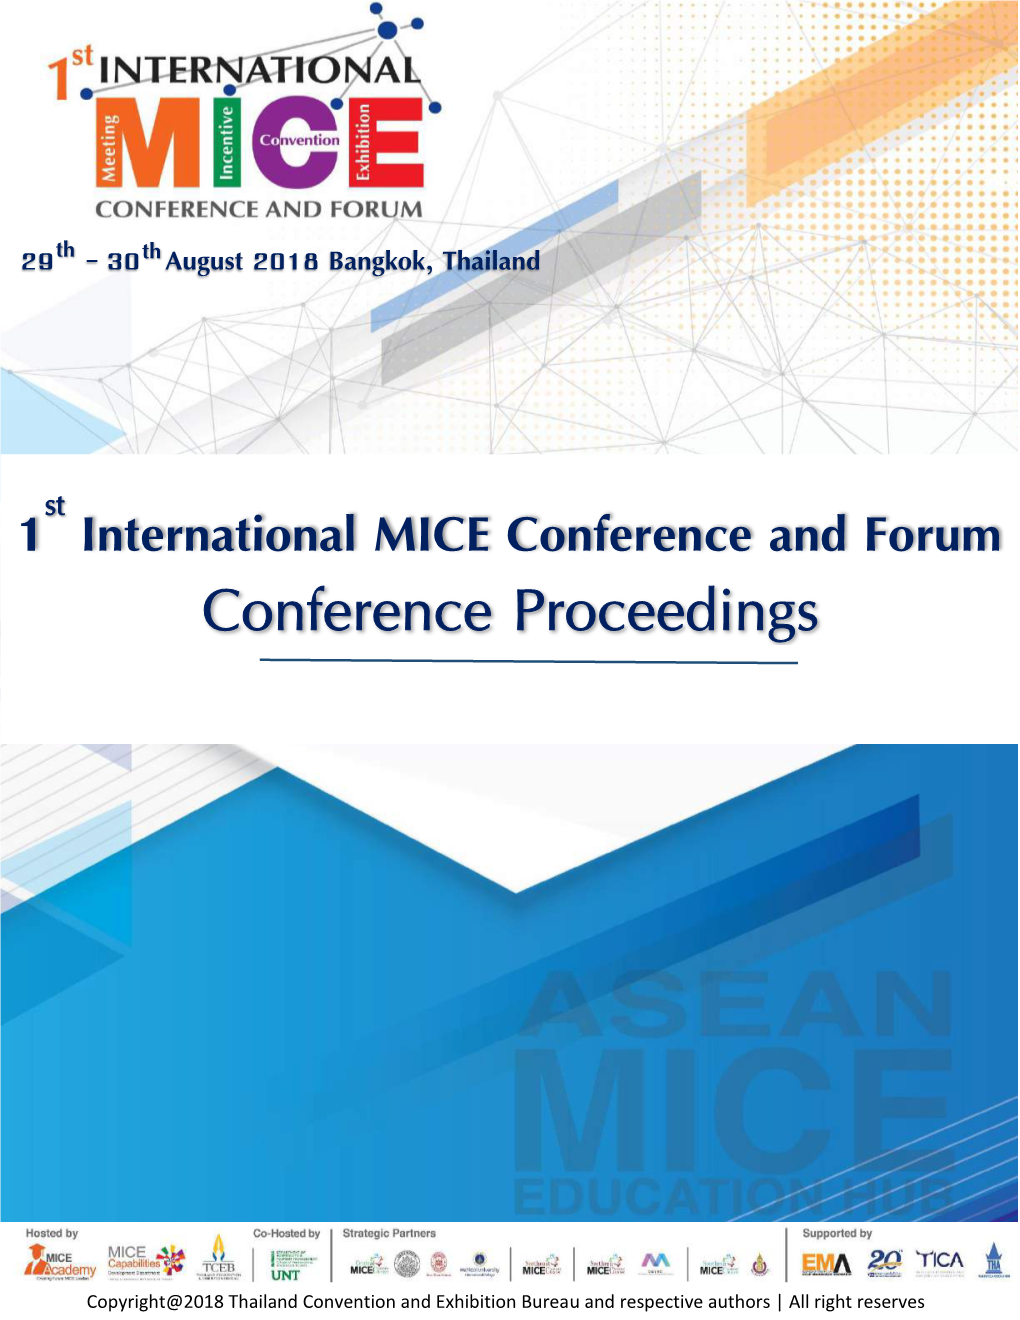 1 International MICE Conference and Forum